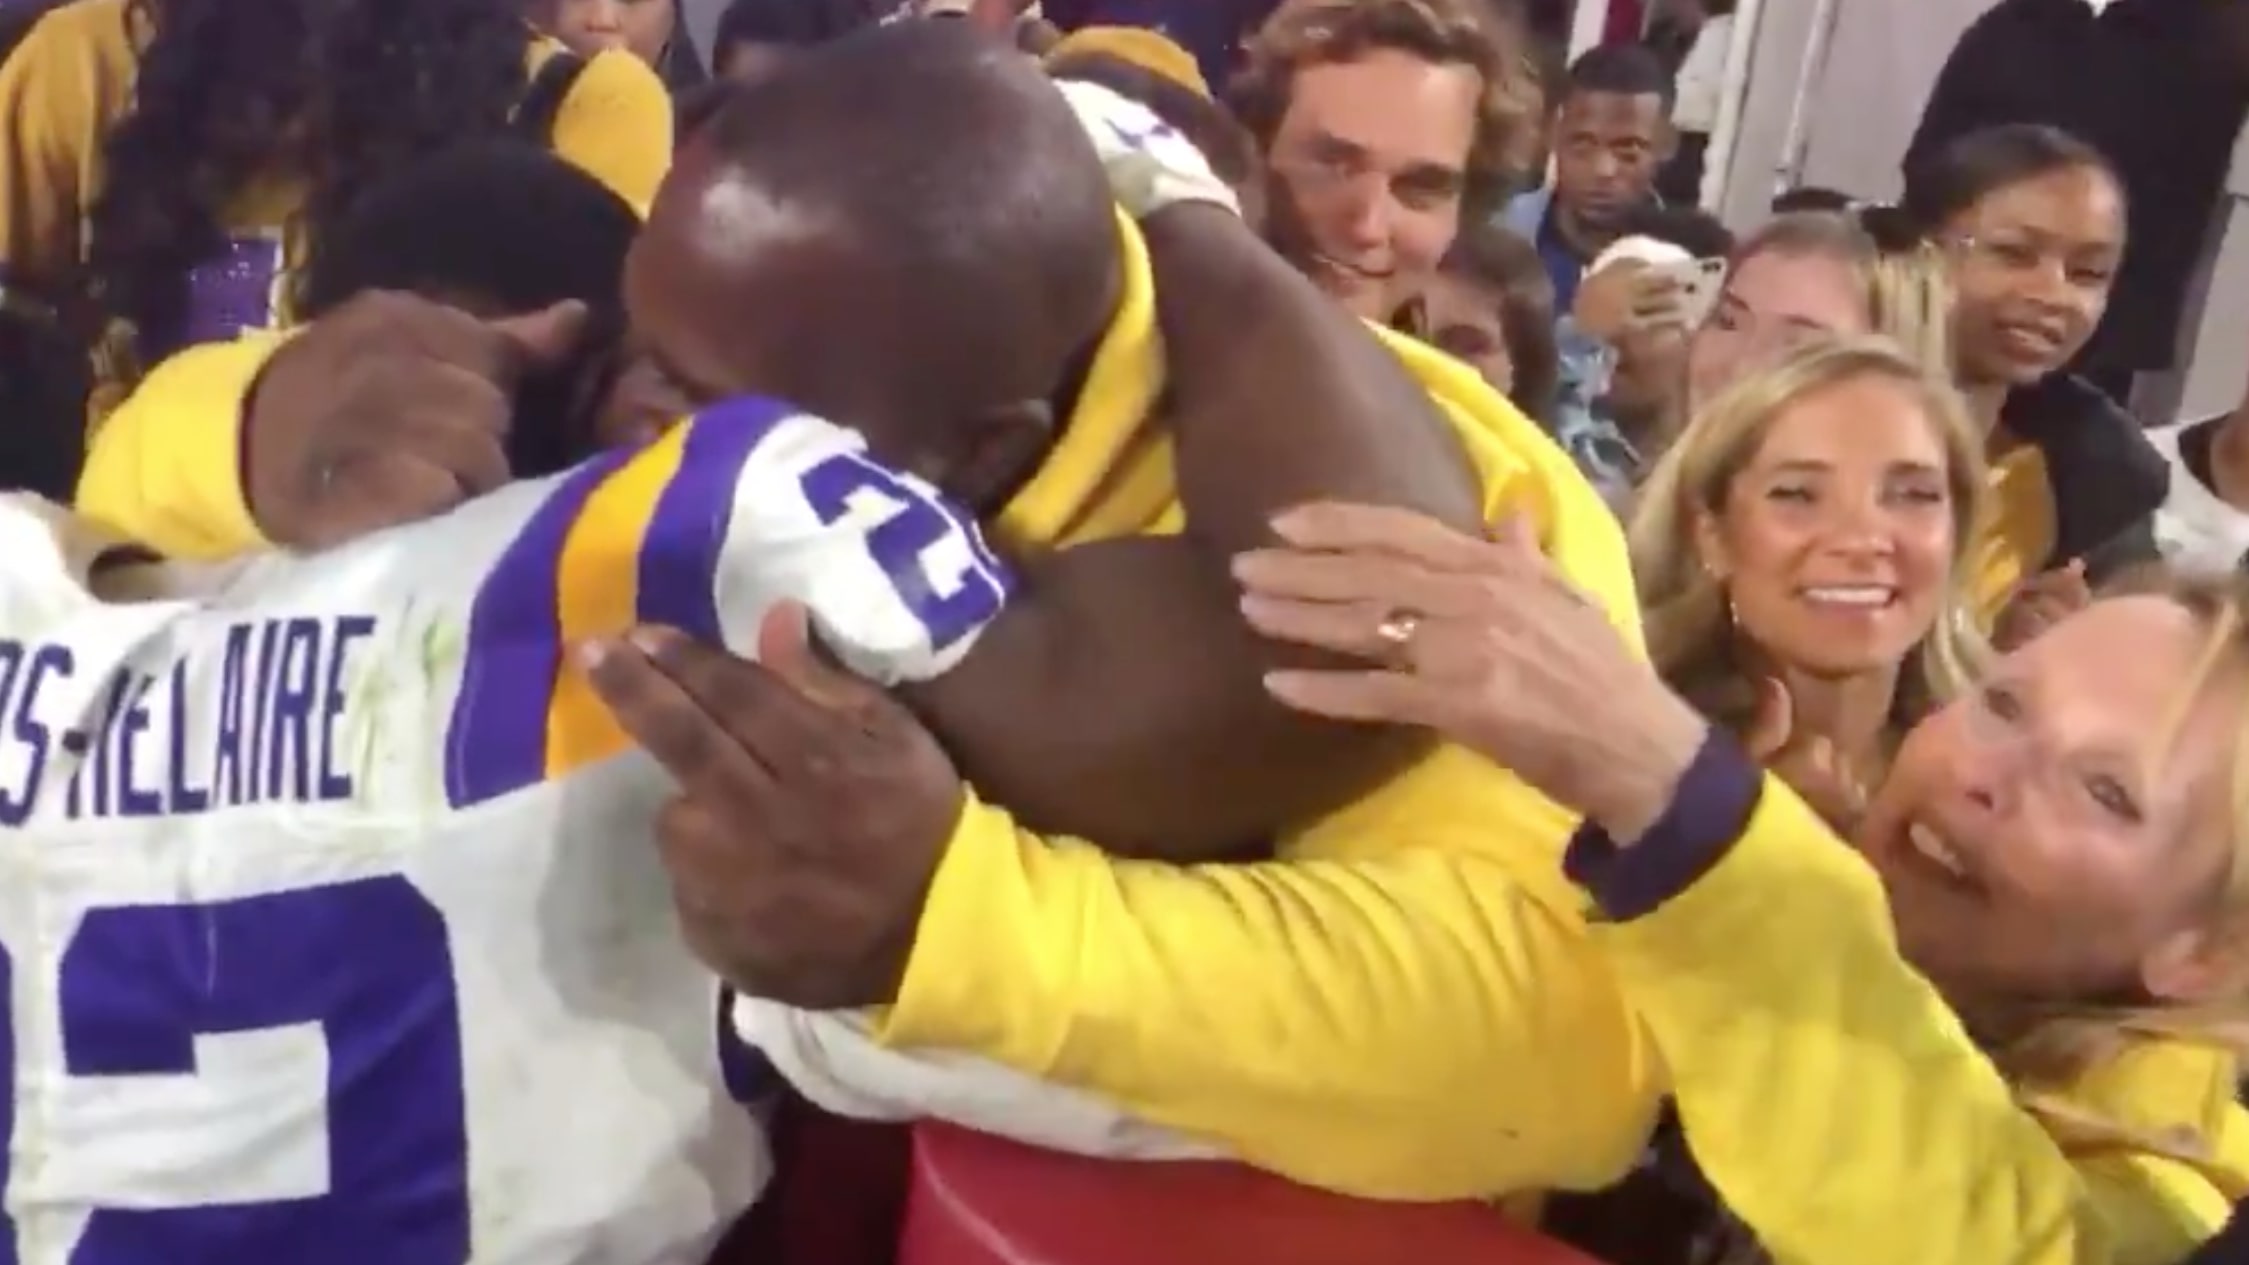 Watch As A Football Player And His Father Share An Intimate Moment While Ignoring The Mess Out Of This Attention-Starved White Woman